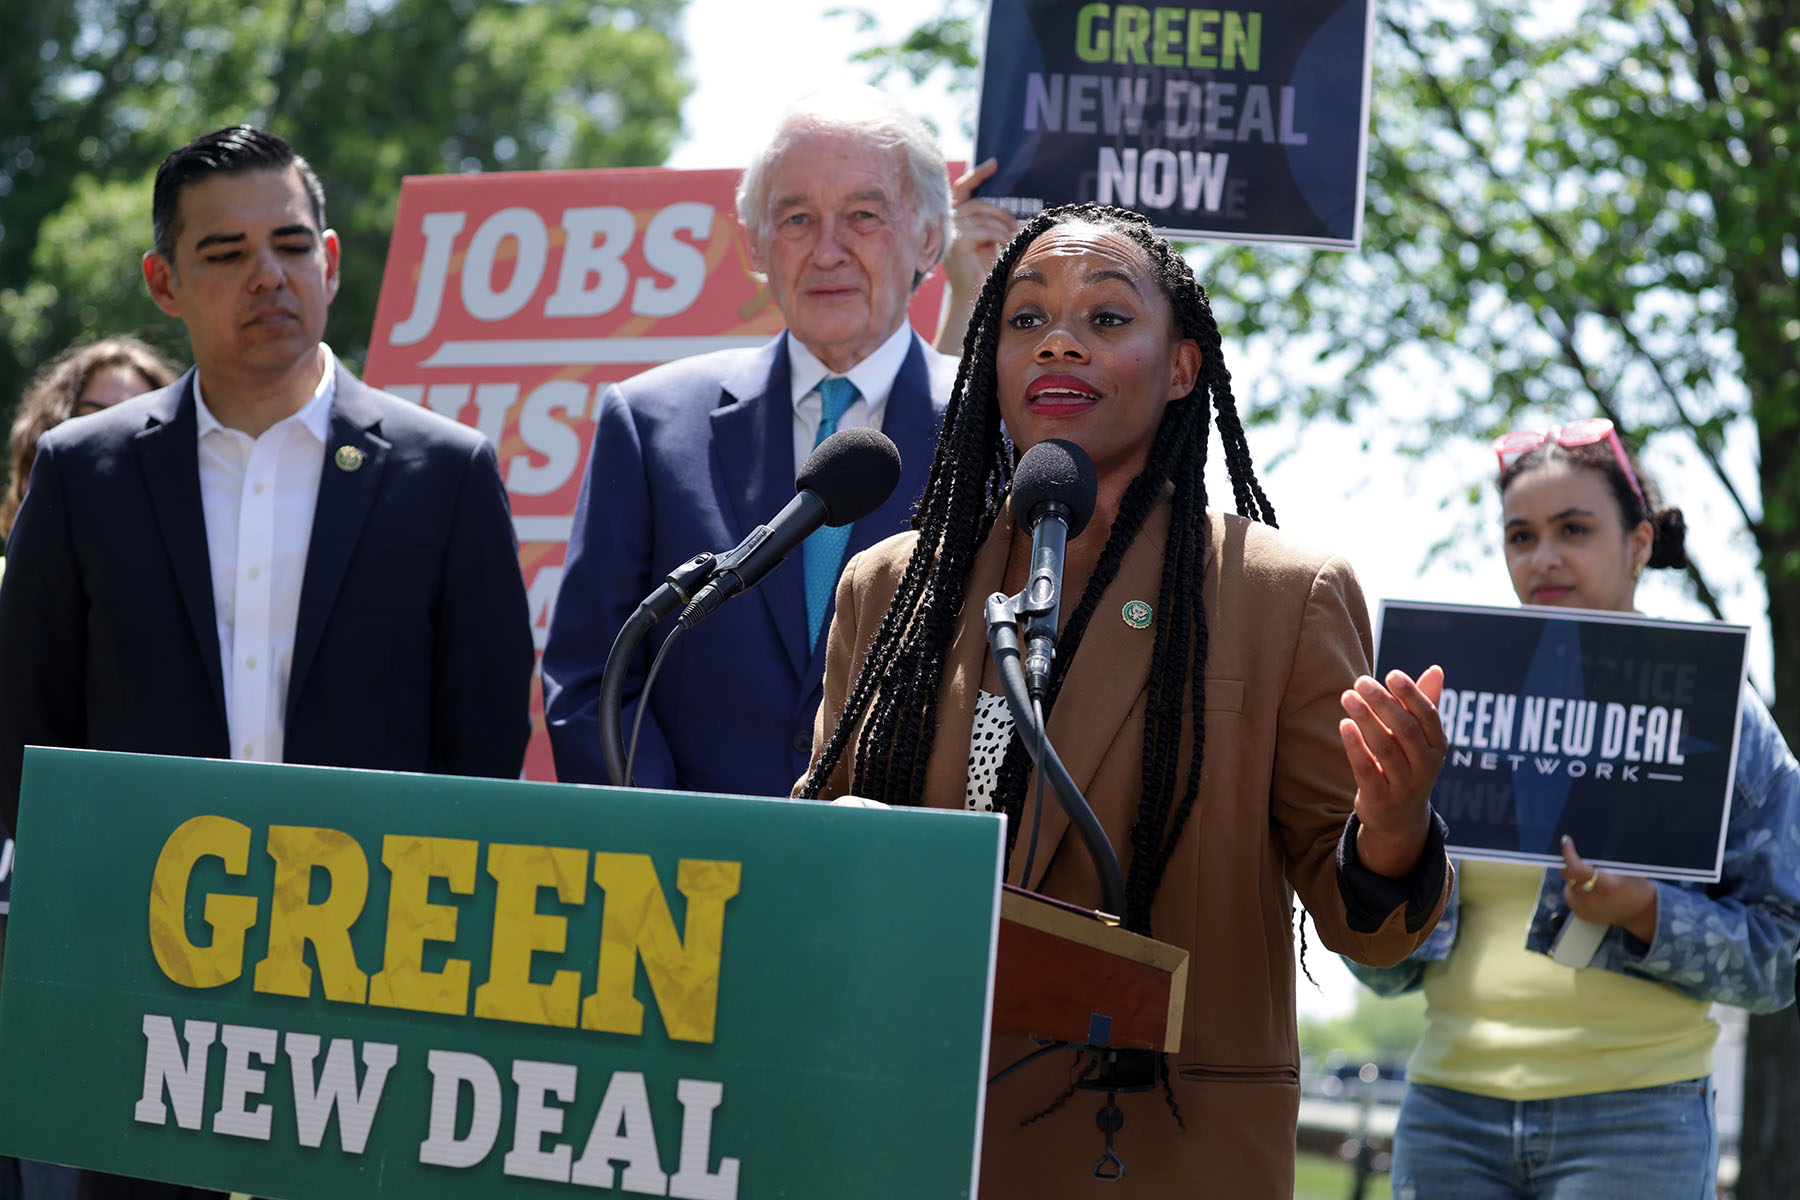 Rep. Summer Lee speaks as Sen. Ed Markey and other participants listen during a news conference on the “Green New Deal.”